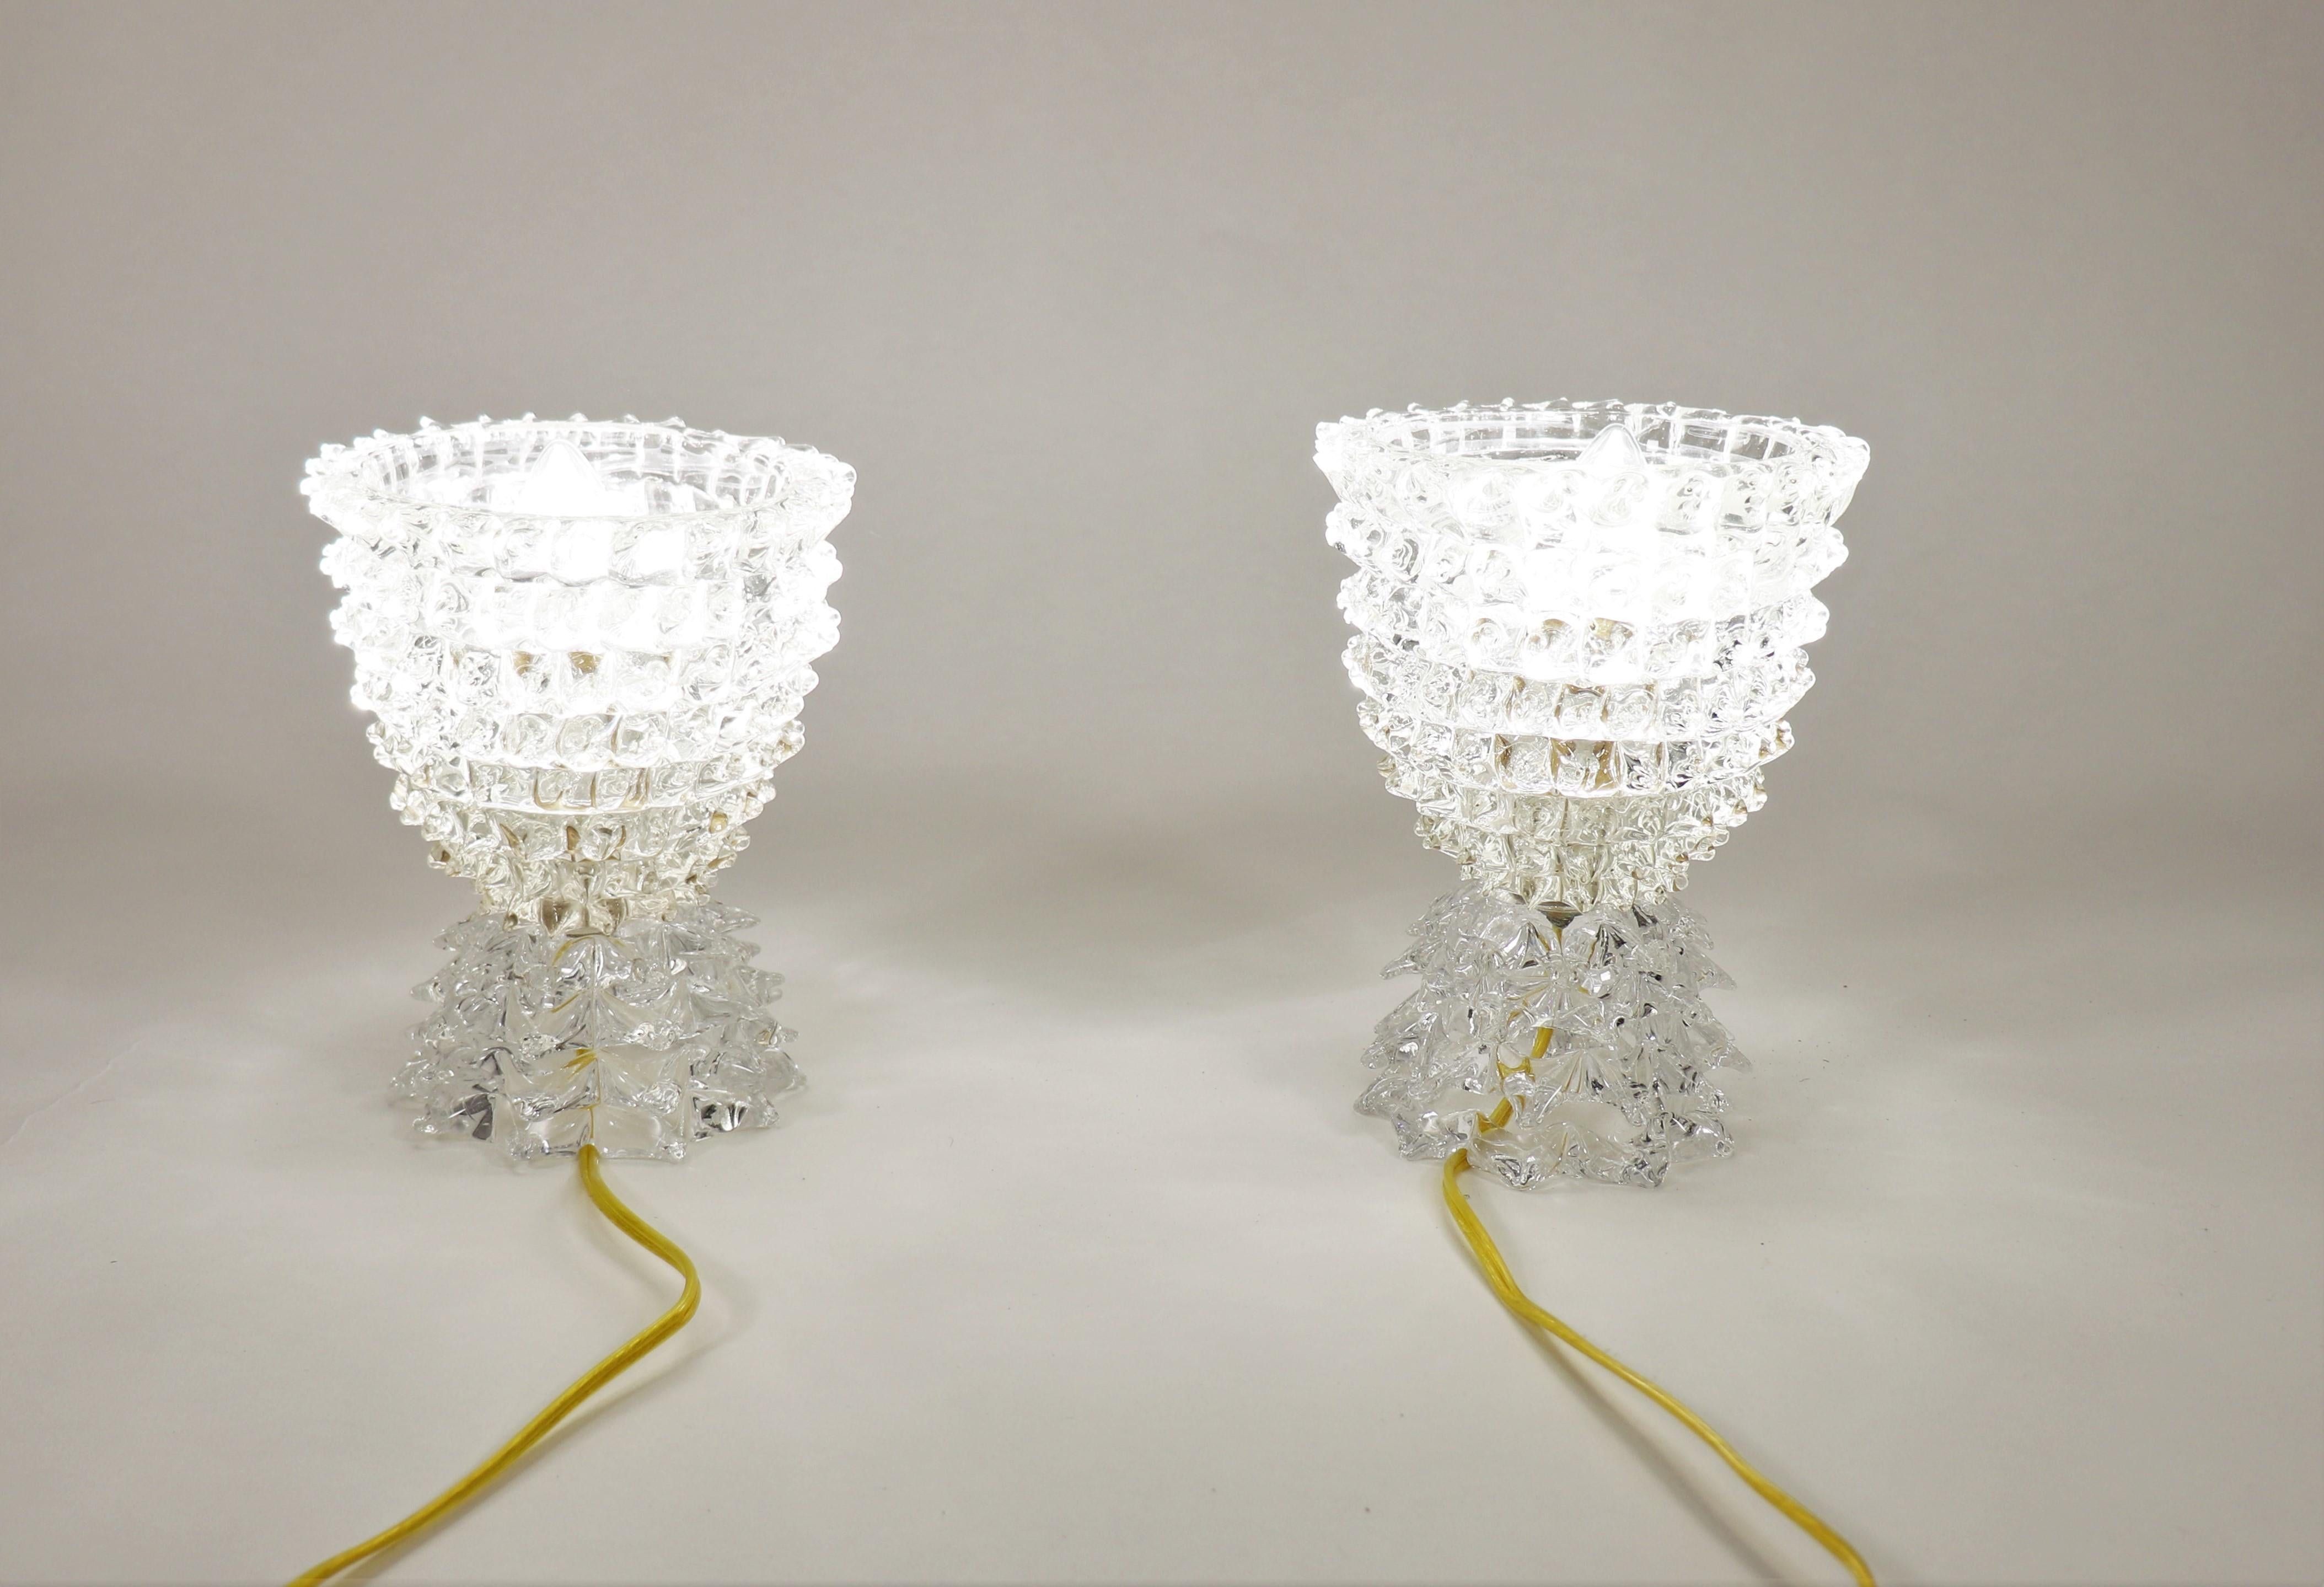 Exceptional pair of Murano glass lamps in the manner of Ercole Barovier. Founded in 1295, Barovier is a respected name in Italian Murano glass design. In the 1920-1939s, designer Ercole Barovier began a 50-year career as the artistic director of